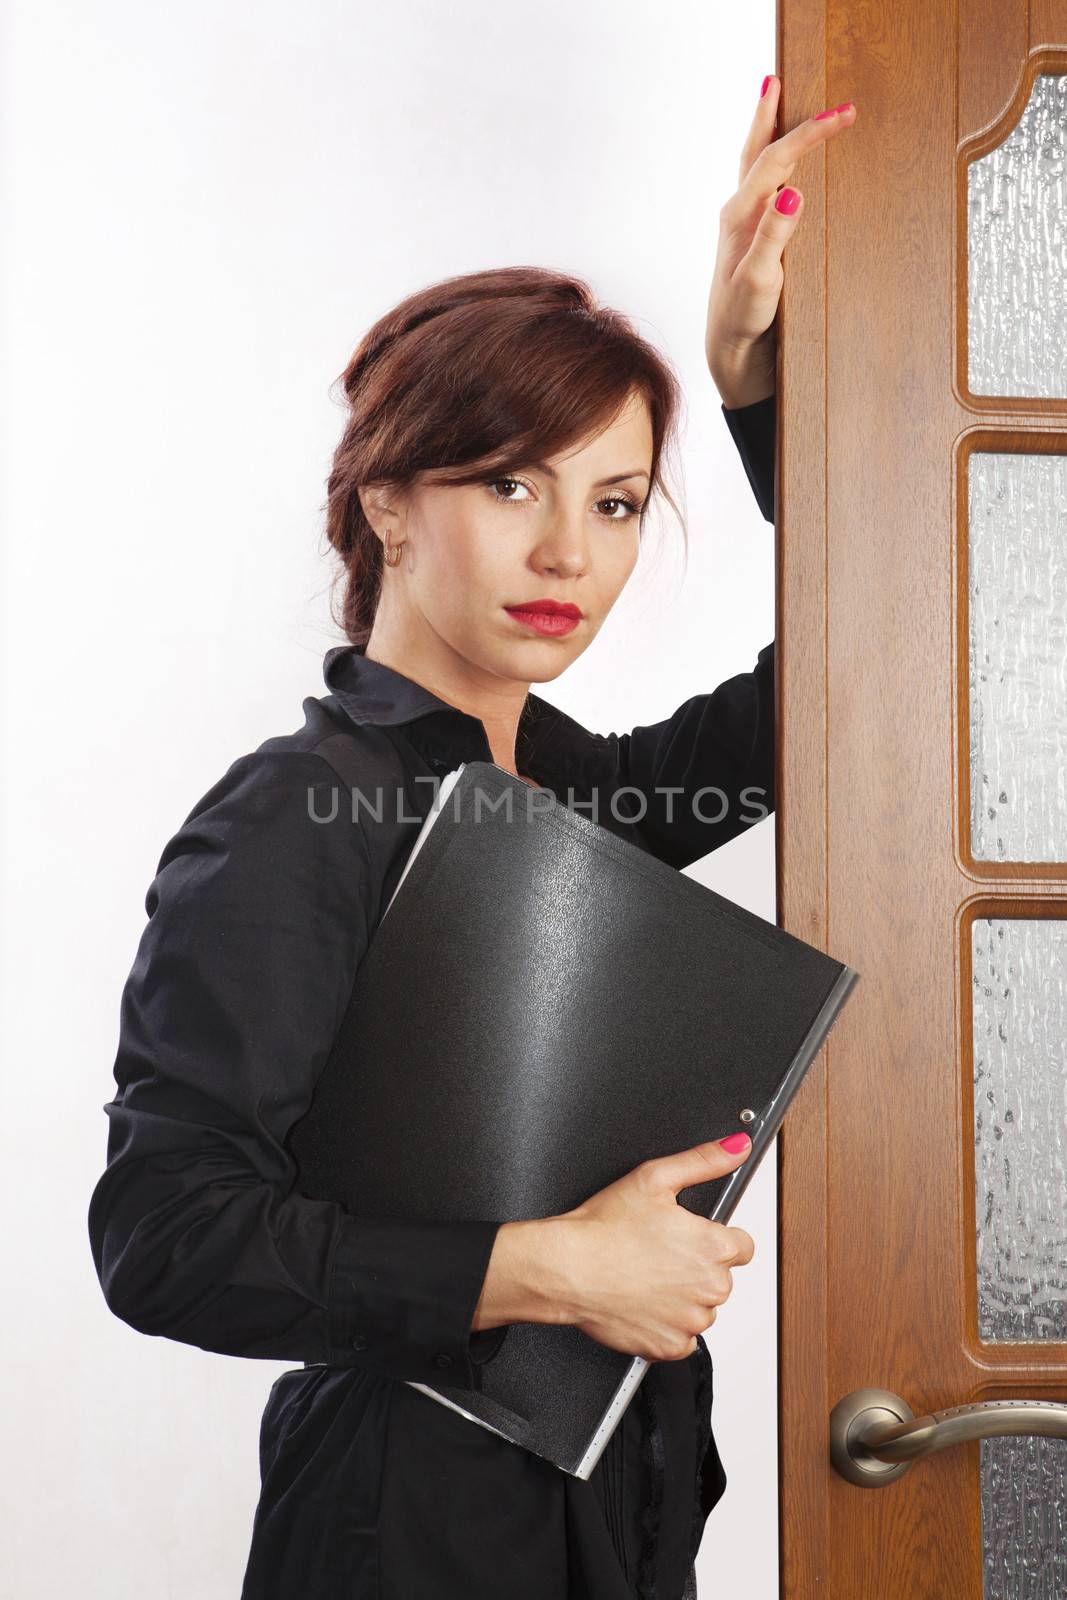 Woman office worker portrait isolated on white background, young female bank employee